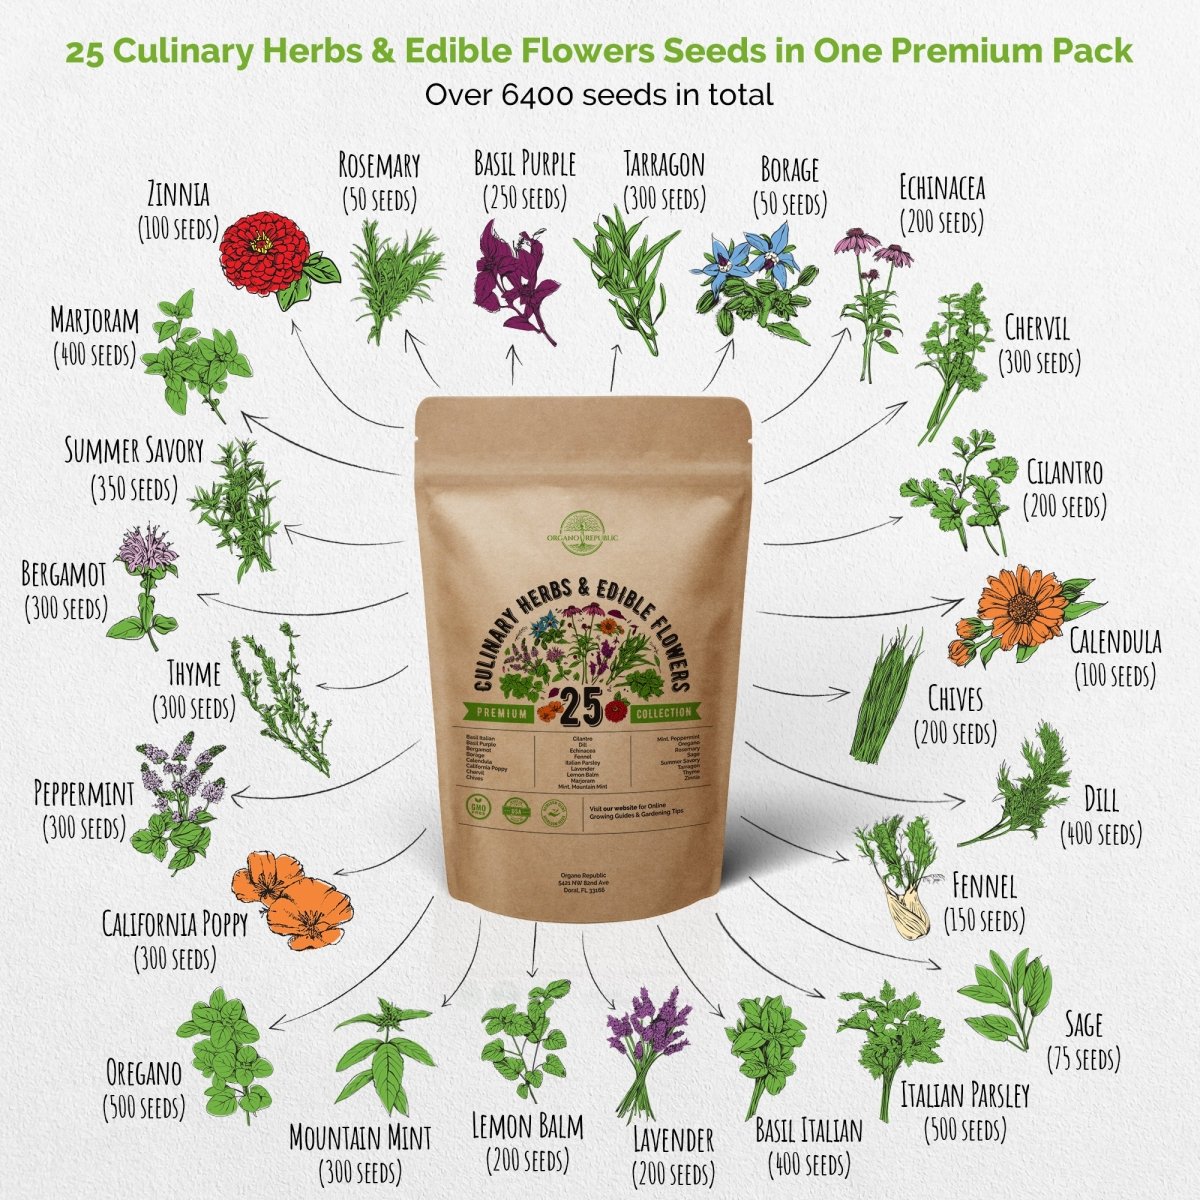 25 Culinary Herbs & Edible Flower Seeds Variety Pack for Planting Indoor & Outdoors. - Organo Republic